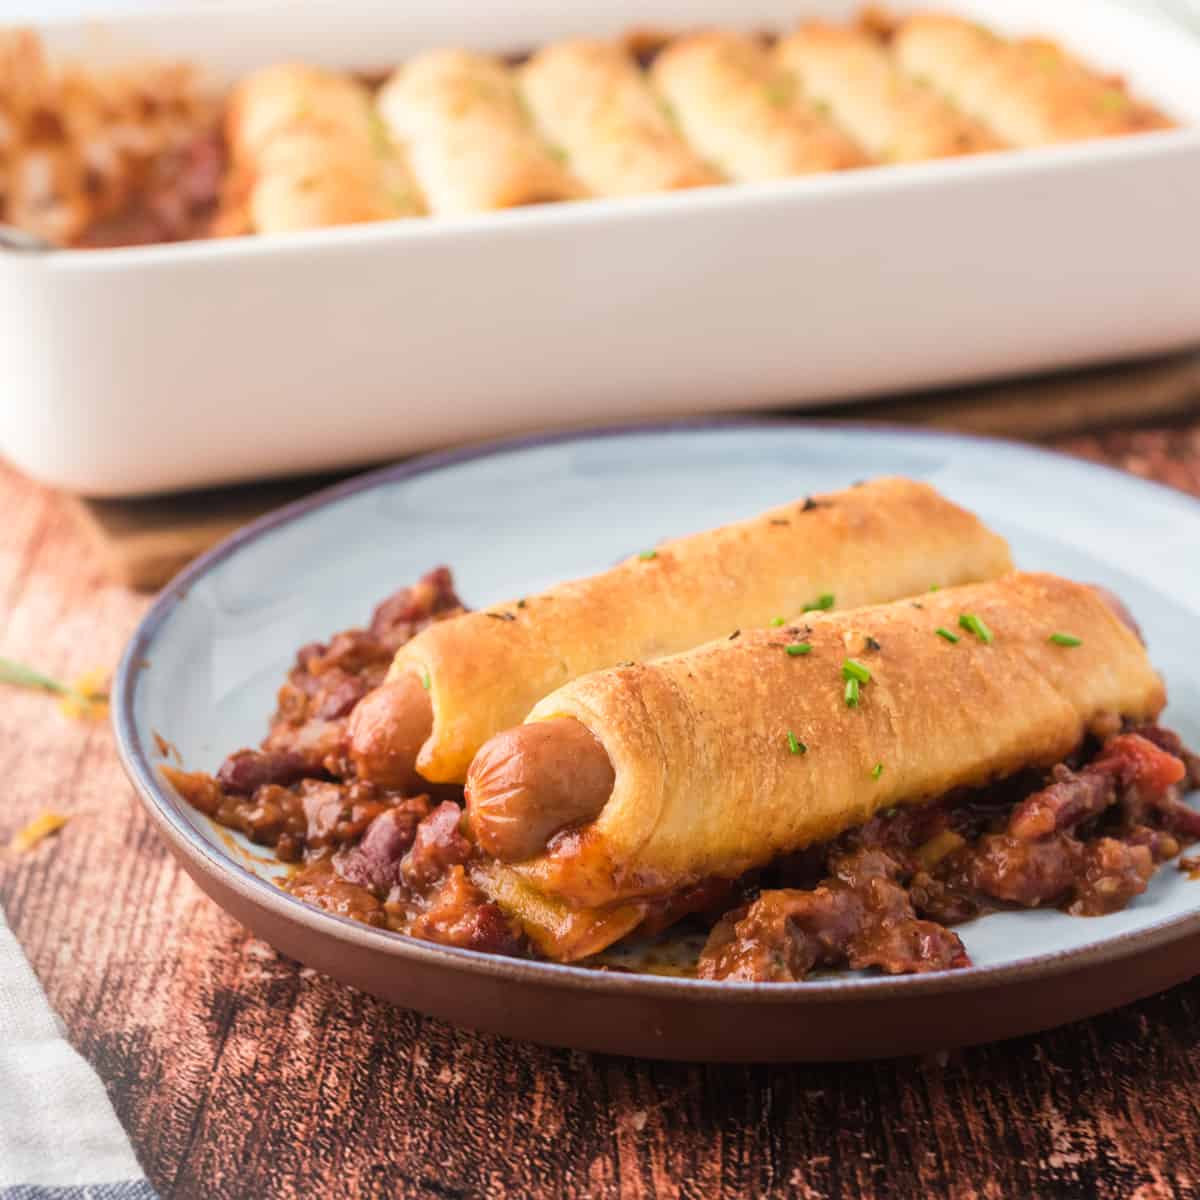 A serving of chili cheese dog casserole on a plate.